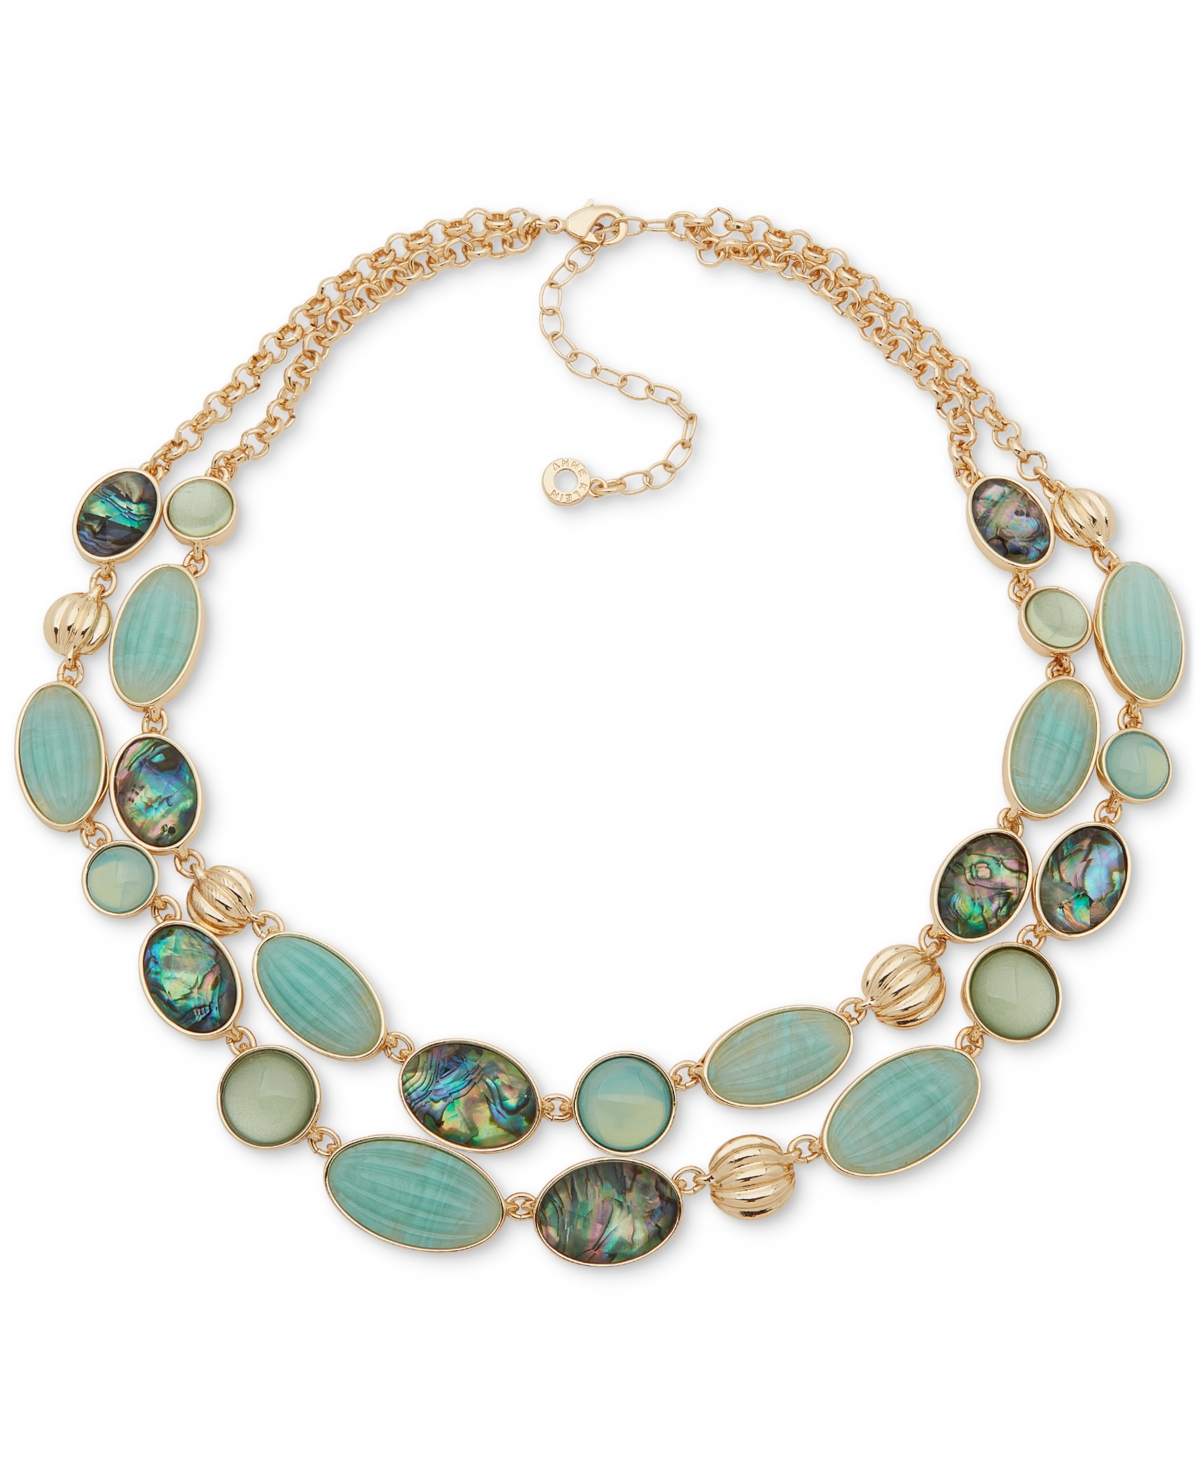 Gold-Tone Mixed Stone Layered Collar Necklace, 16" + 3" extender - Blue